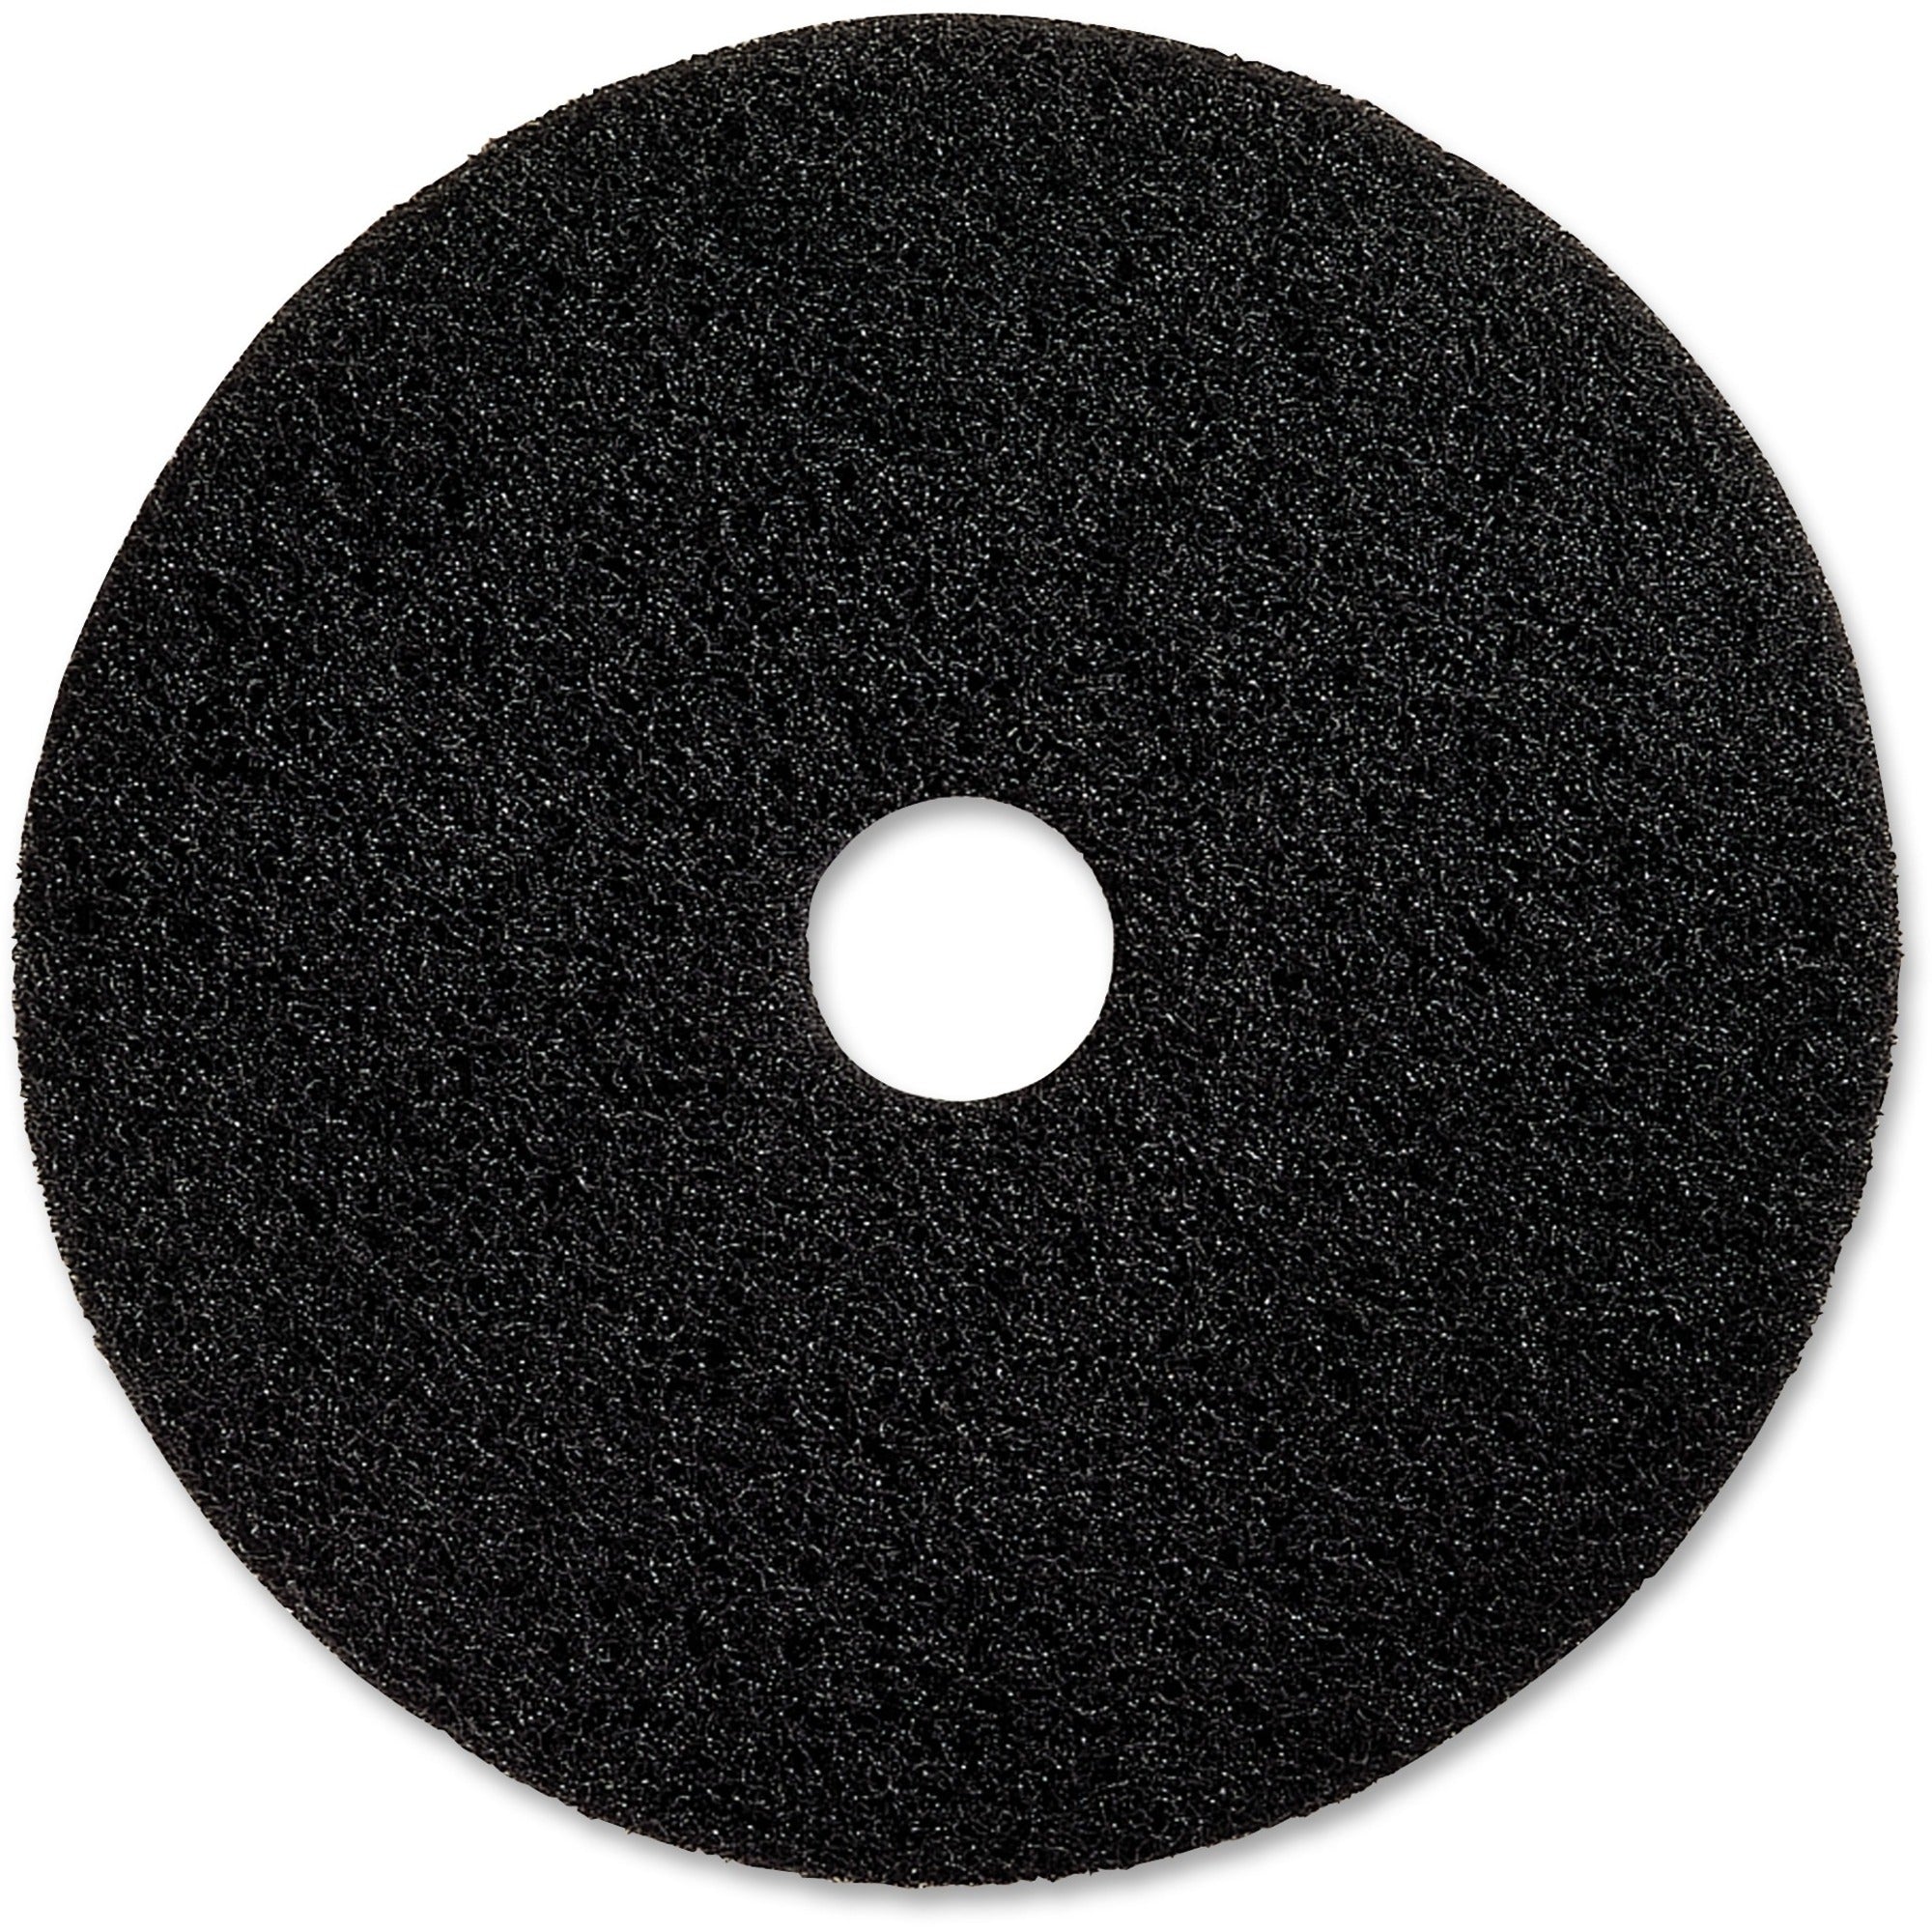 Genuine Joe Black Floor Stripping Pad - 13" Diameter - 5/Carton x 13" Diameter x 1" Thickness - Stripping - 175 rpm to 350 rpm Speed Supported - Resilient, Heavy Duty, Flexible, Long Lasting - Fiber - Black - 